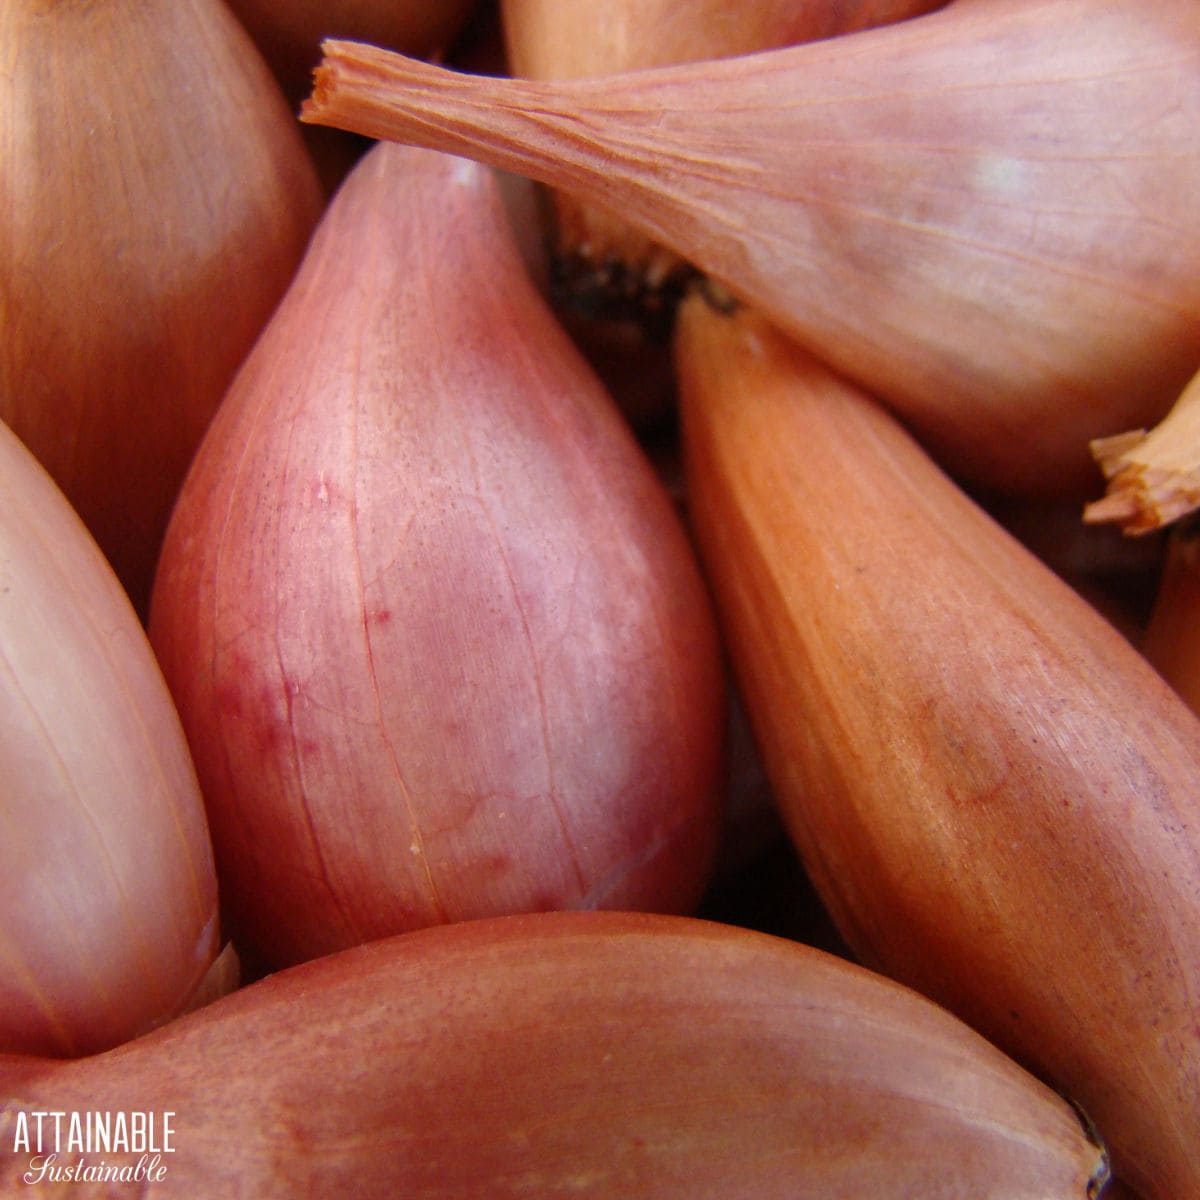 A close up of shallots with pink skin.